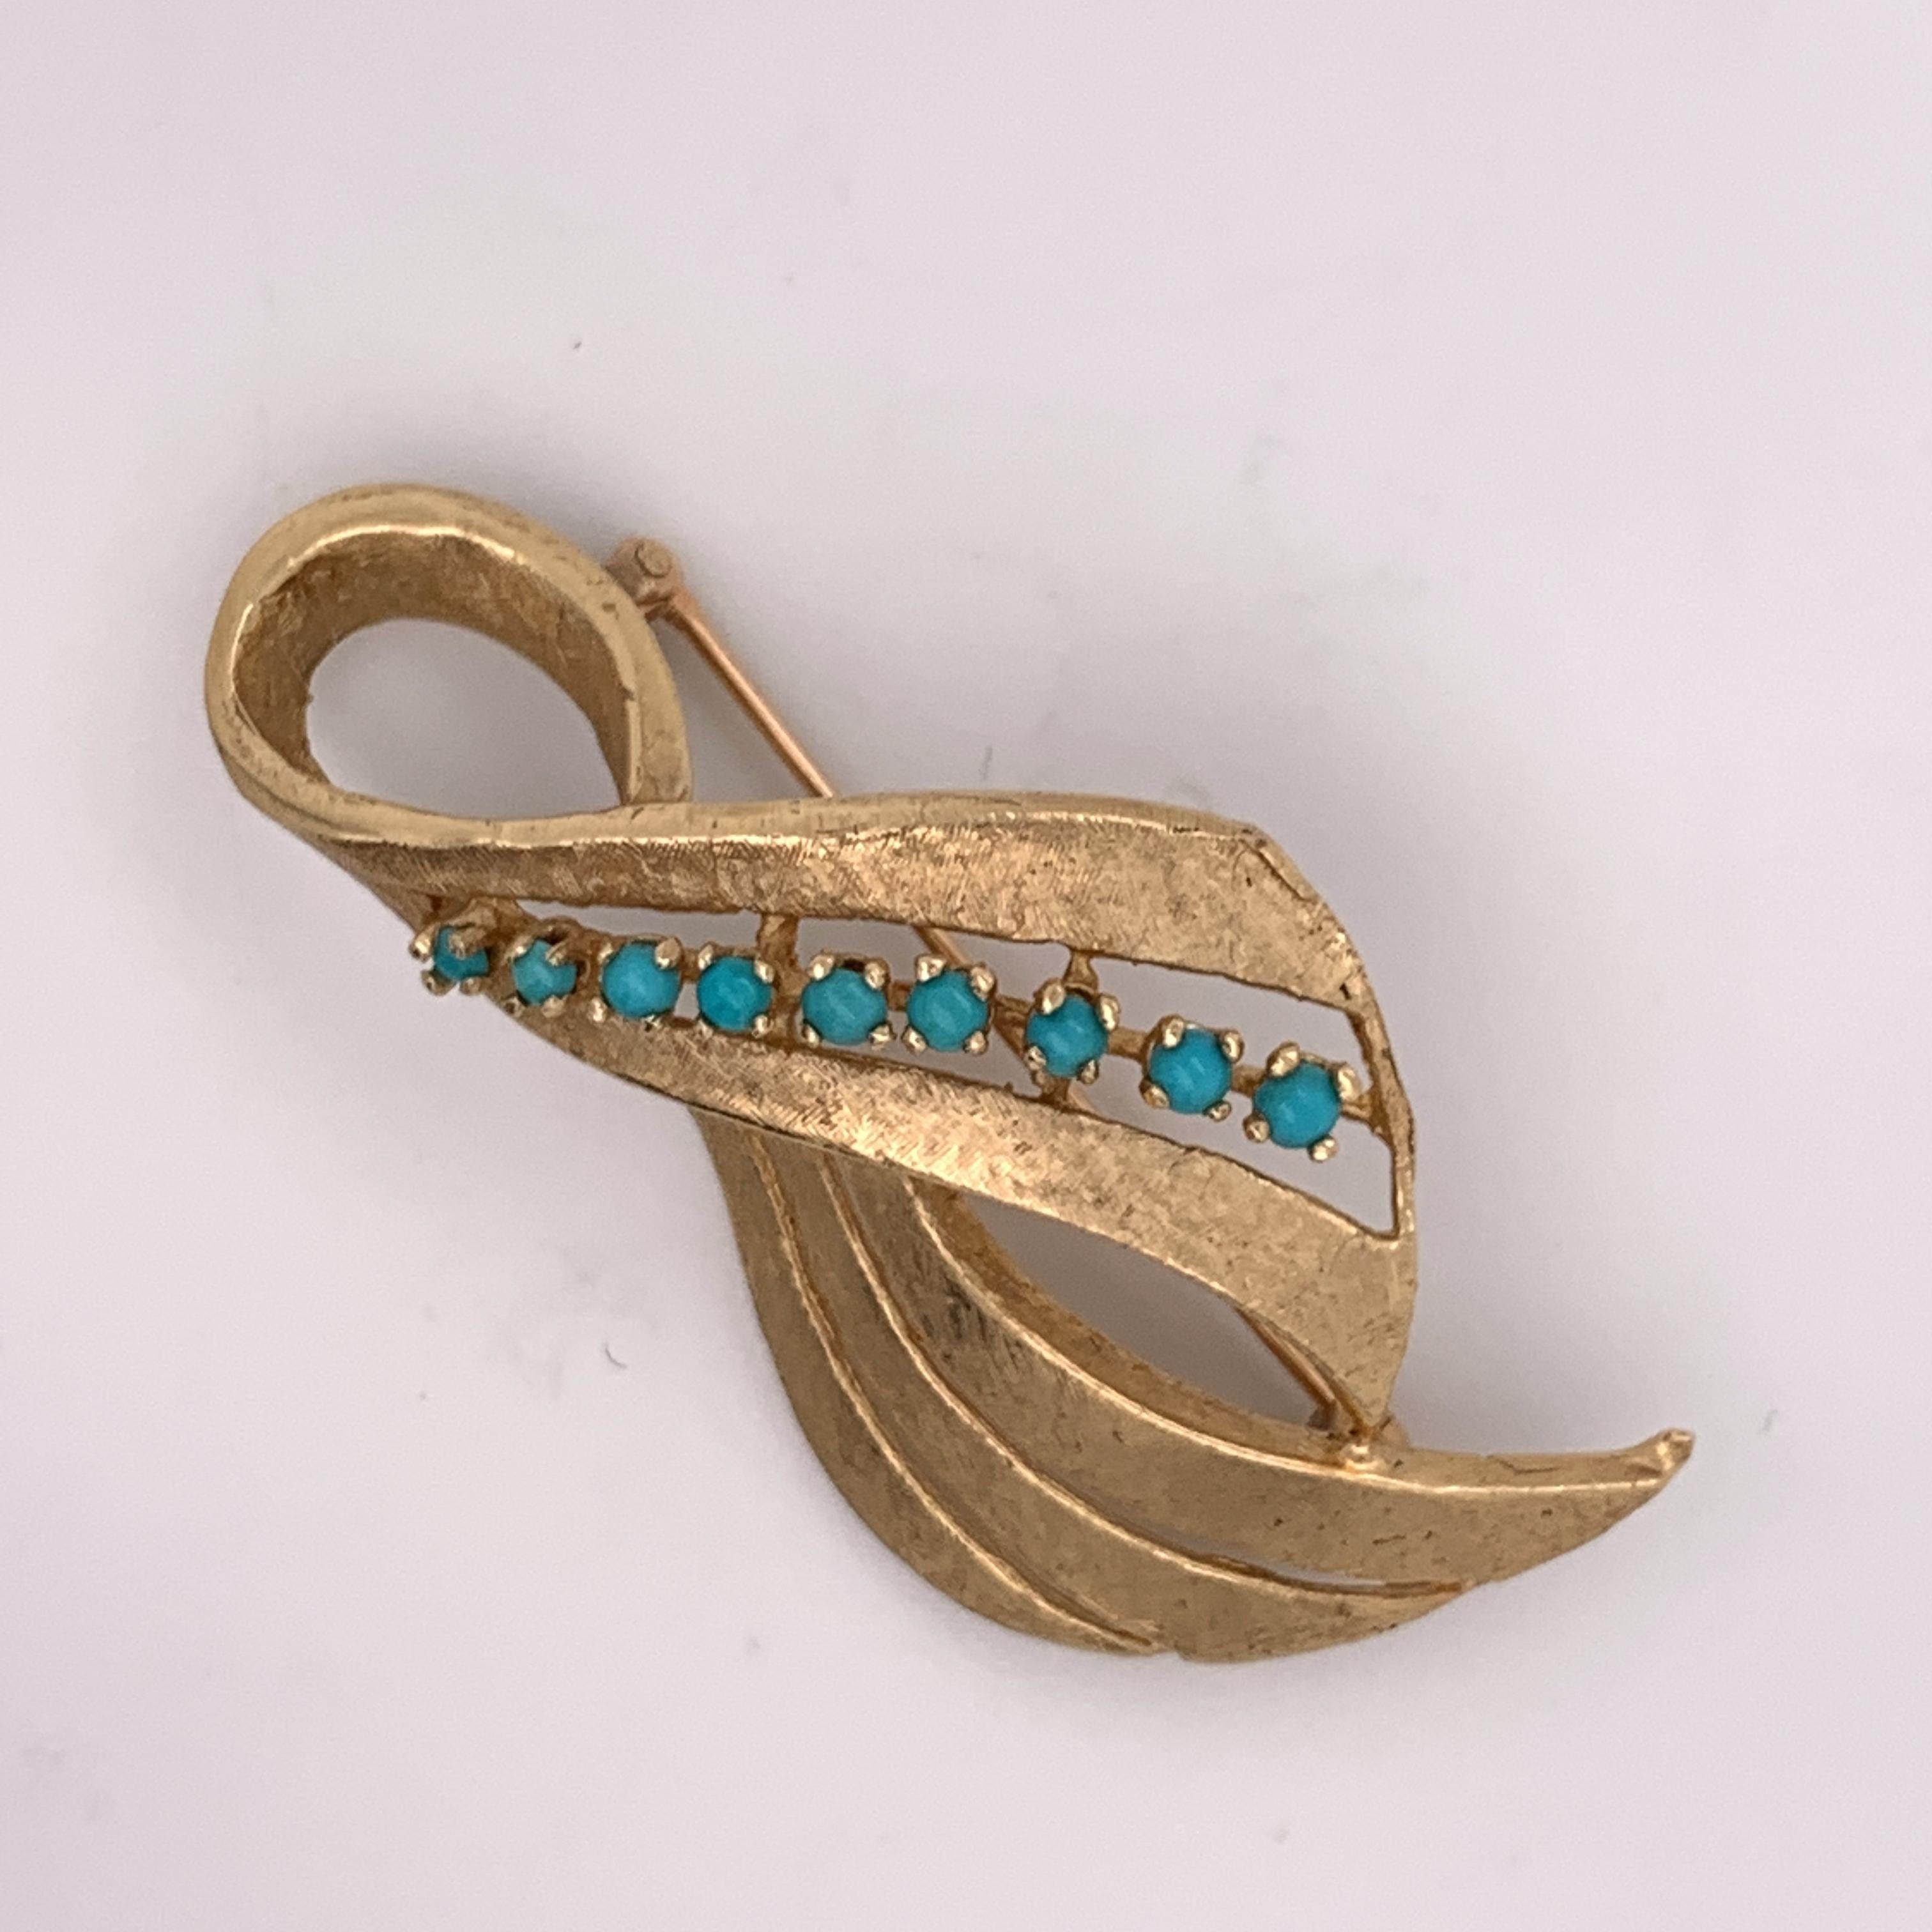 This gorgeous statement brooch can also be worn as a pendant. The main shape of the brooch is that of a criss-cross ribbon of glittering textured 14K yellow gold. It features nine lovely little turquoise buttons set along the center of the top swoop